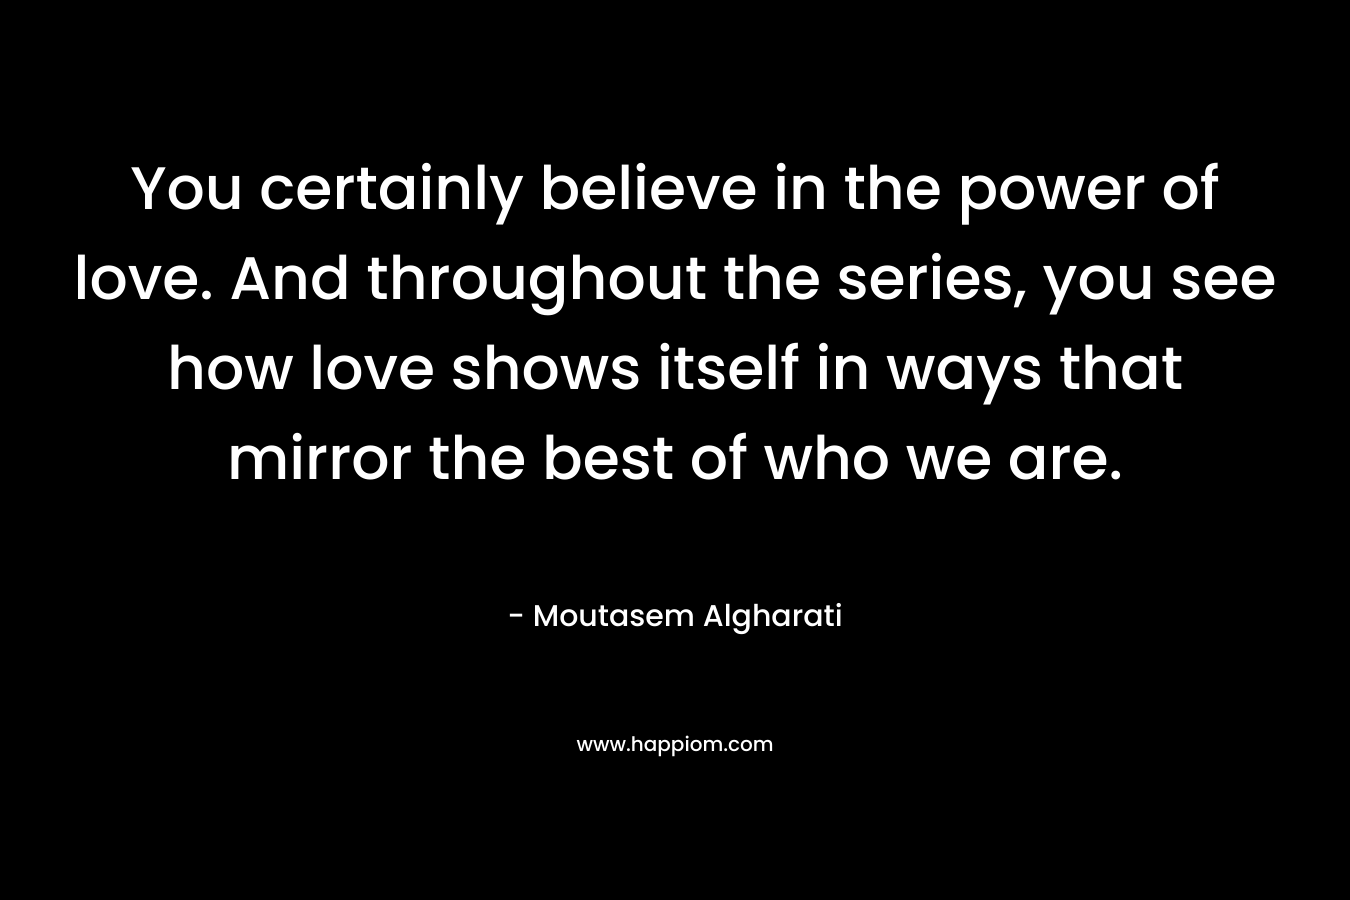 You certainly believe in the power of love. And throughout the series, you see how love shows itself in ways that mirror the best of who we are. – Moutasem Algharati